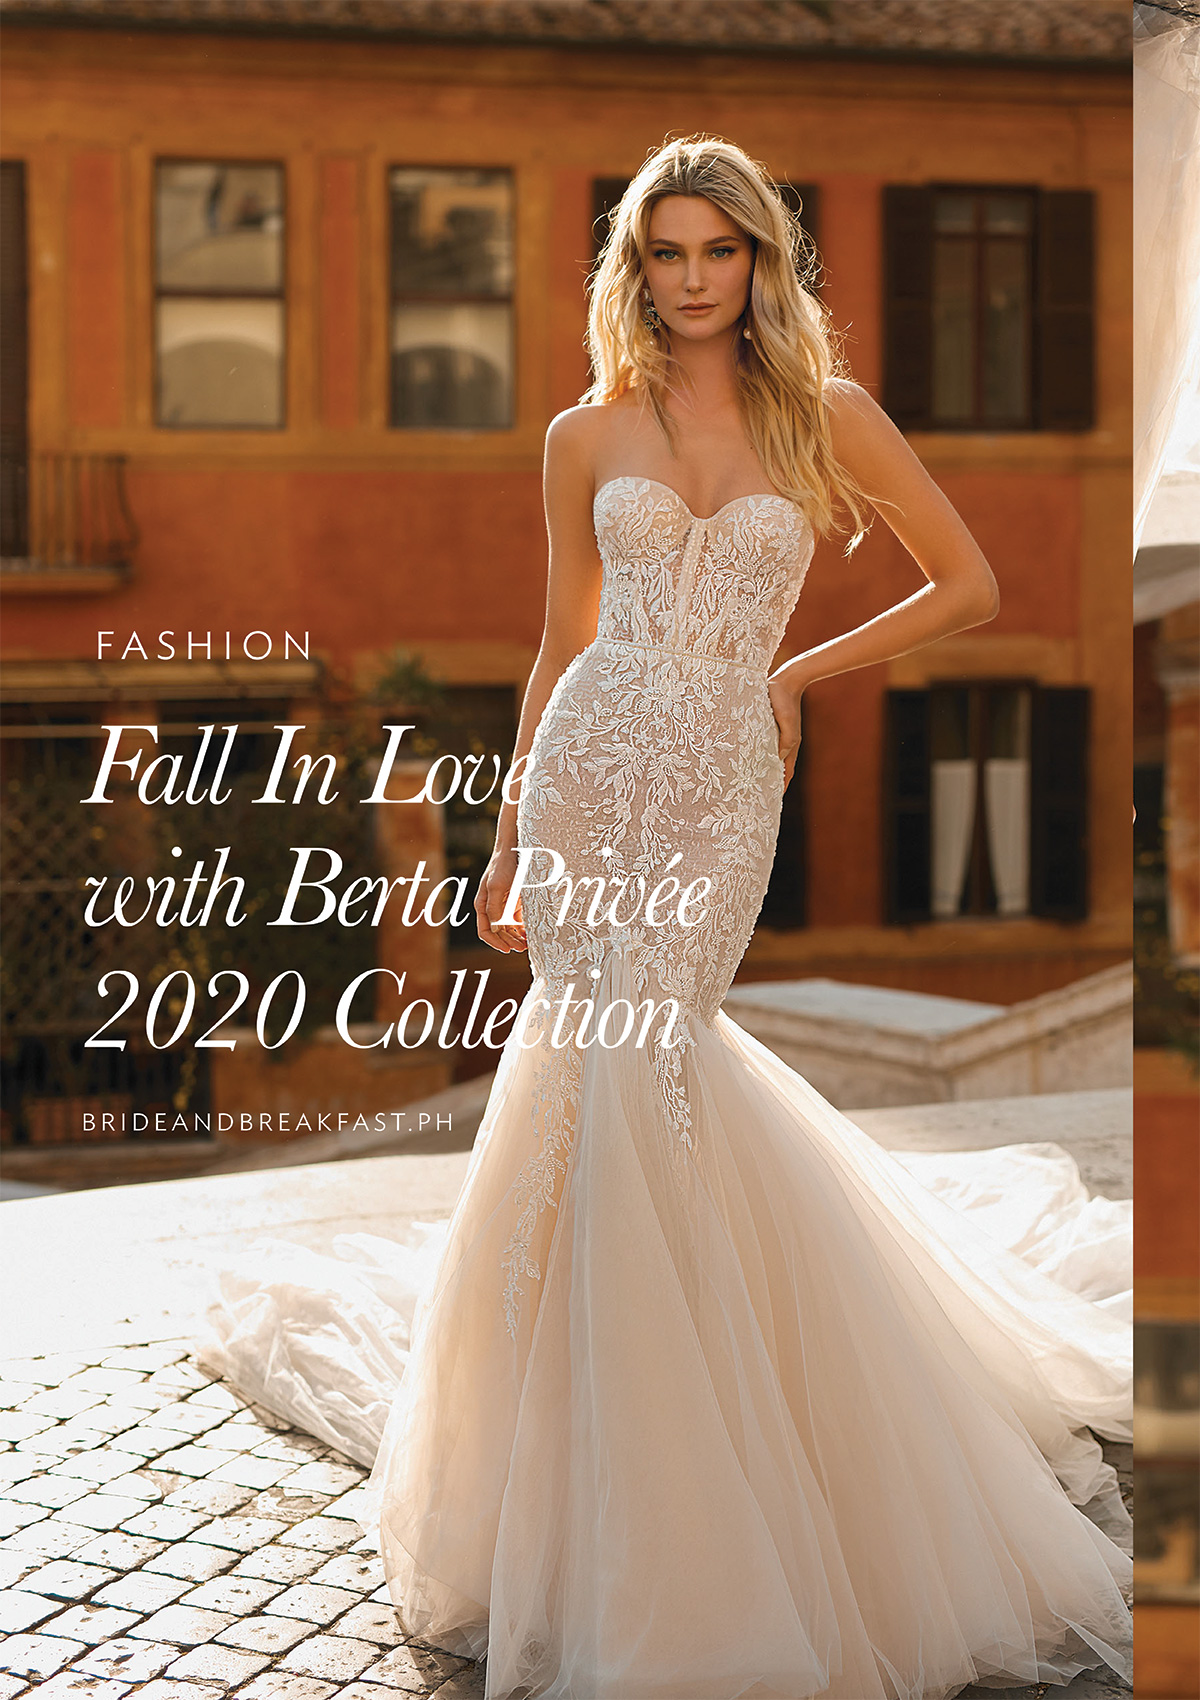 Fall in Love with the Berta Privée 2020 Collection